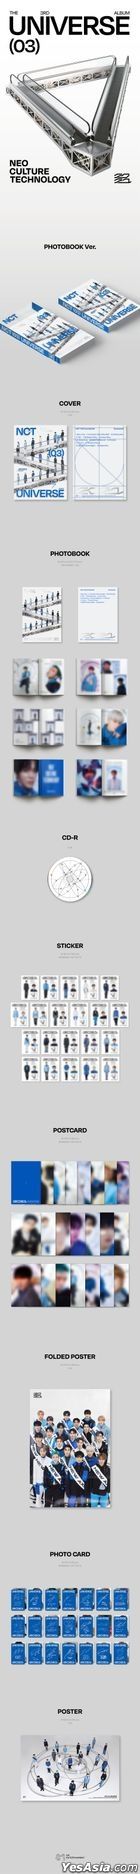 NCT Vol. 3 - Universe (Photobook Version) + Poster in Tube